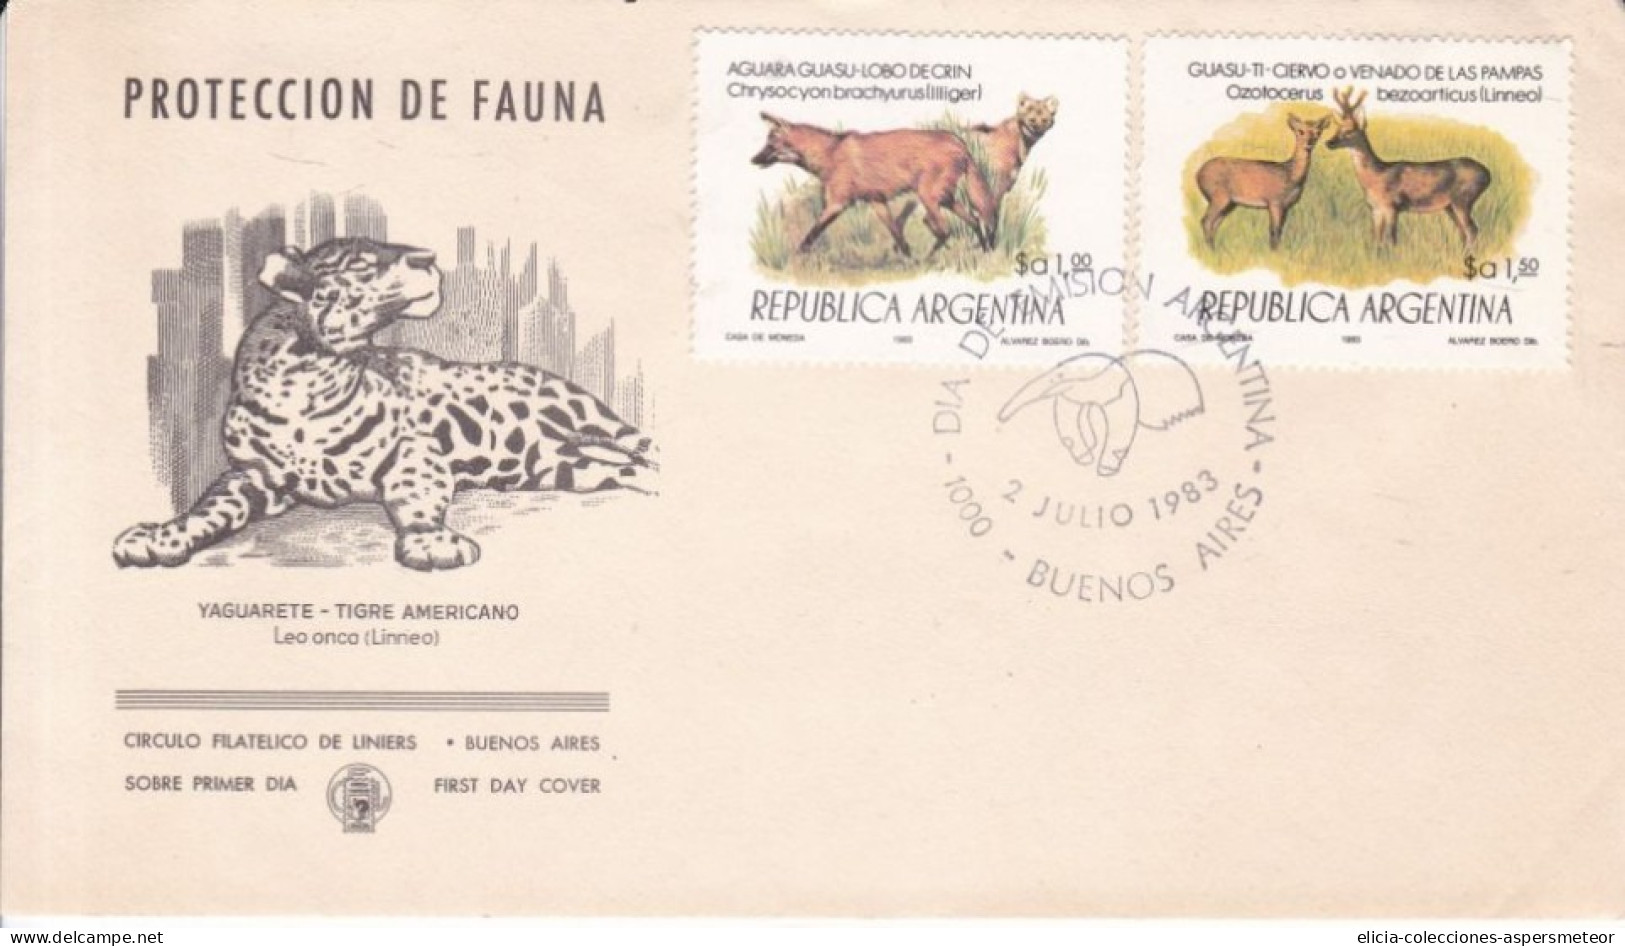 Argentina - 1983 - Envelope - First Day Issue Postmark - Fauna Protection -  Aguara Guasu And Guasu Ti Stamps - Caja 30 - Used Stamps